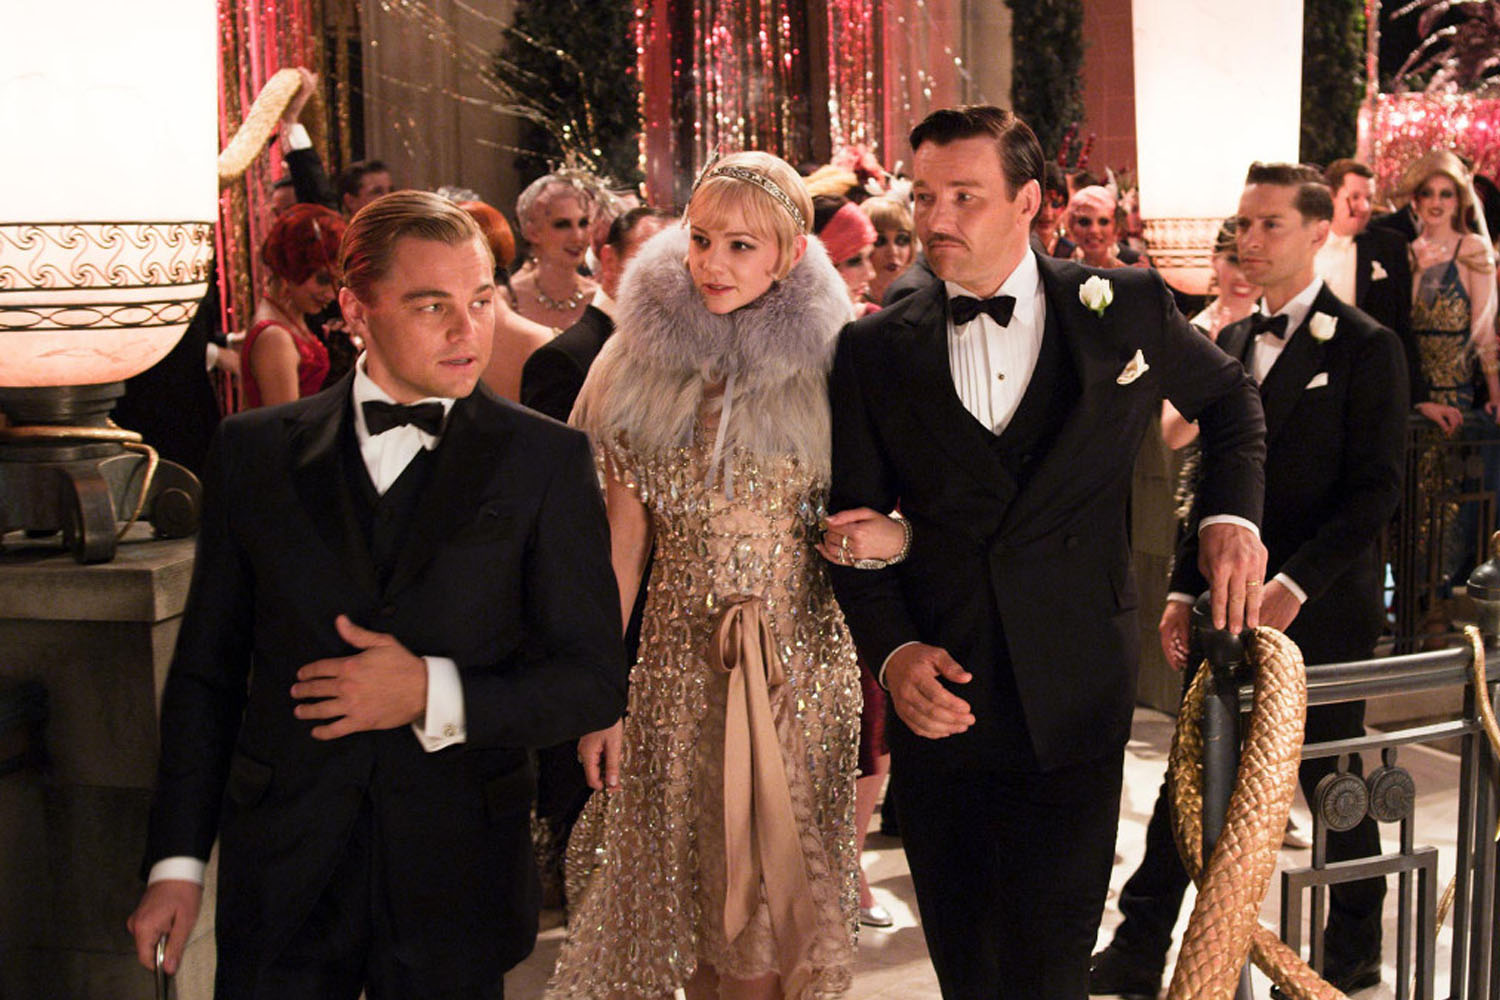 The scene from 'The Great Gatsby' is inspired by the F. Scott Fitzgerald classic of literature